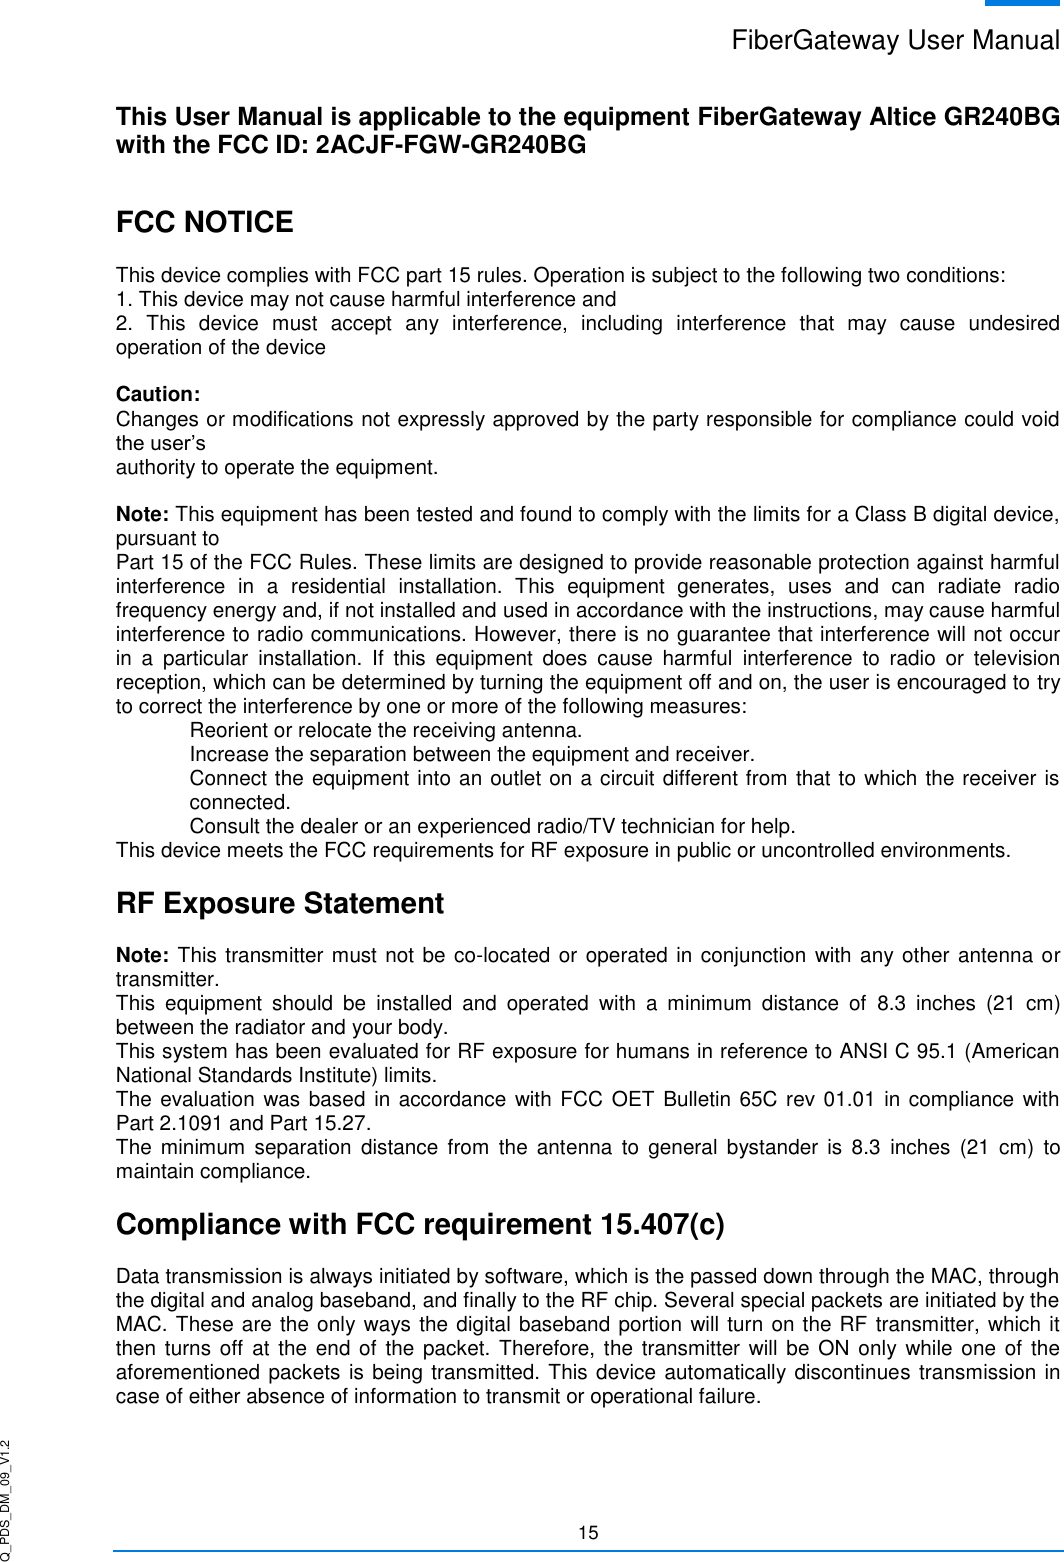 Q_PDS_DM_09_V1.2 FiberGateway User Manual  15   This User Manual is applicable to the equipment FiberGateway Altice GR240BG with the FCC ID: 2ACJF-FGW-GR240BG  FCC NOTICE  This device complies with FCC part 15 rules. Operation is subject to the following two conditions: 1. This device may not cause harmful interference and 2.  This  device  must  accept  any  interference,  including  interference  that  may  cause  undesired operation of the device  Caution: Changes or modifications not expressly approved by the party responsible for compliance could void the user’s authority to operate the equipment.  Note: This equipment has been tested and found to comply with the limits for a Class B digital device, pursuant to  Part 15 of the FCC Rules. These limits are designed to provide reasonable protection against harmful interference  in  a  residential  installation.  This  equipment  generates,  uses  and  can  radiate  radio frequency energy and, if not installed and used in accordance with the instructions, may cause harmful interference to radio communications. However, there is no guarantee that interference will not occur in  a  particular  installation.  If  this  equipment  does  cause  harmful  interference  to  radio  or  television reception, which can be determined by turning the equipment off and on, the user is encouraged to try to correct the interference by one or more of the following measures: Reorient or relocate the receiving antenna. Increase the separation between the equipment and receiver. Connect the equipment into an outlet on a circuit different from that to which the receiver is connected. Consult the dealer or an experienced radio/TV technician for help. This device meets the FCC requirements for RF exposure in public or uncontrolled environments.  RF Exposure Statement  Note: This transmitter must not be co-located or operated in conjunction with any other antenna or transmitter.  This  equipment  should  be  installed  and  operated  with  a  minimum  distance  of  8.3  inches  (21  cm) between the radiator and your body.  This system has been evaluated for RF exposure for humans in reference to ANSI C 95.1 (American National Standards Institute) limits.  The evaluation  was based in accordance with FCC OET Bulletin 65C rev 01.01 in compliance with Part 2.1091 and Part 15.27.  The  minimum  separation  distance  from  the antenna  to  general  bystander  is  8.3  inches  (21  cm)  to maintain compliance.  Compliance with FCC requirement 15.407(c)  Data transmission is always initiated by software, which is the passed down through the MAC, through the digital and analog baseband, and finally to the RF chip. Several special packets are initiated by the MAC. These are the only ways the digital baseband portion will turn on the RF transmitter, which it then turns  off at the  end of the  packet.  Therefore,  the transmitter will be  ON only while  one of  the aforementioned packets is being transmitted. This device automatically discontinues transmission in case of either absence of information to transmit or operational failure.  